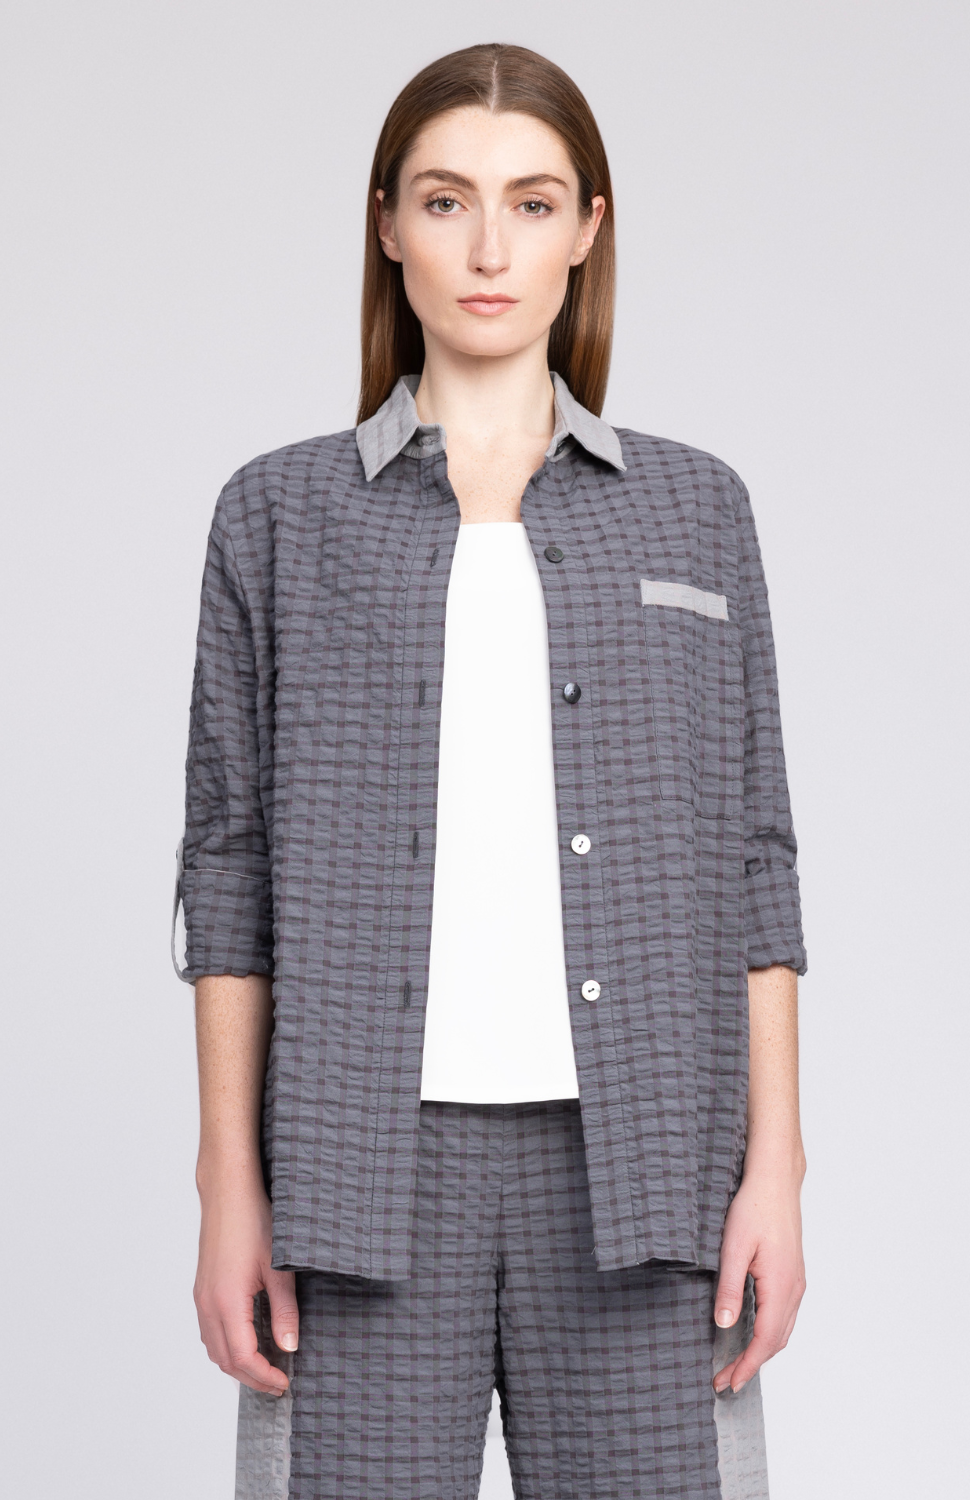 PREORDER Crinkle Shirting Collared Button Down w/ Utility Sleeve